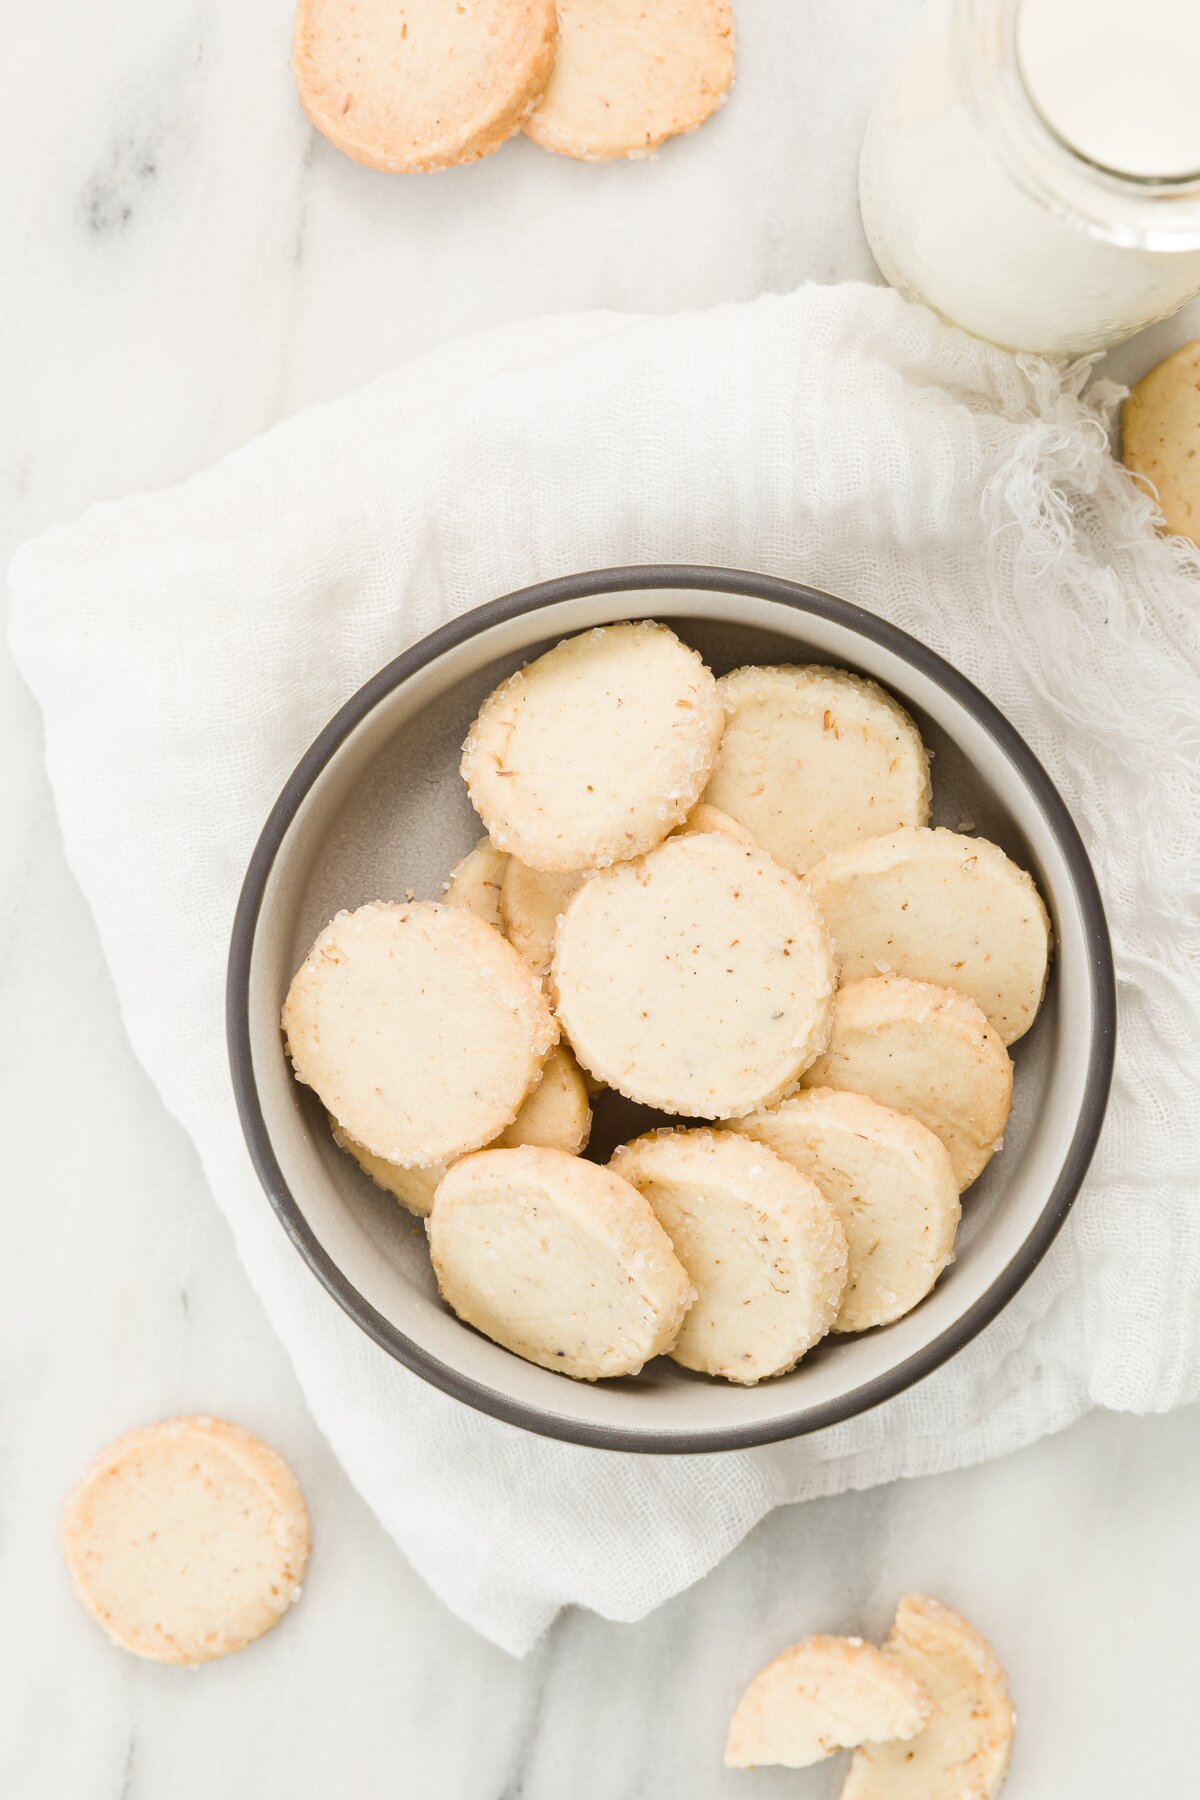 Top down view of lavender shortbread cookies in a bowl with cookies and milk around it